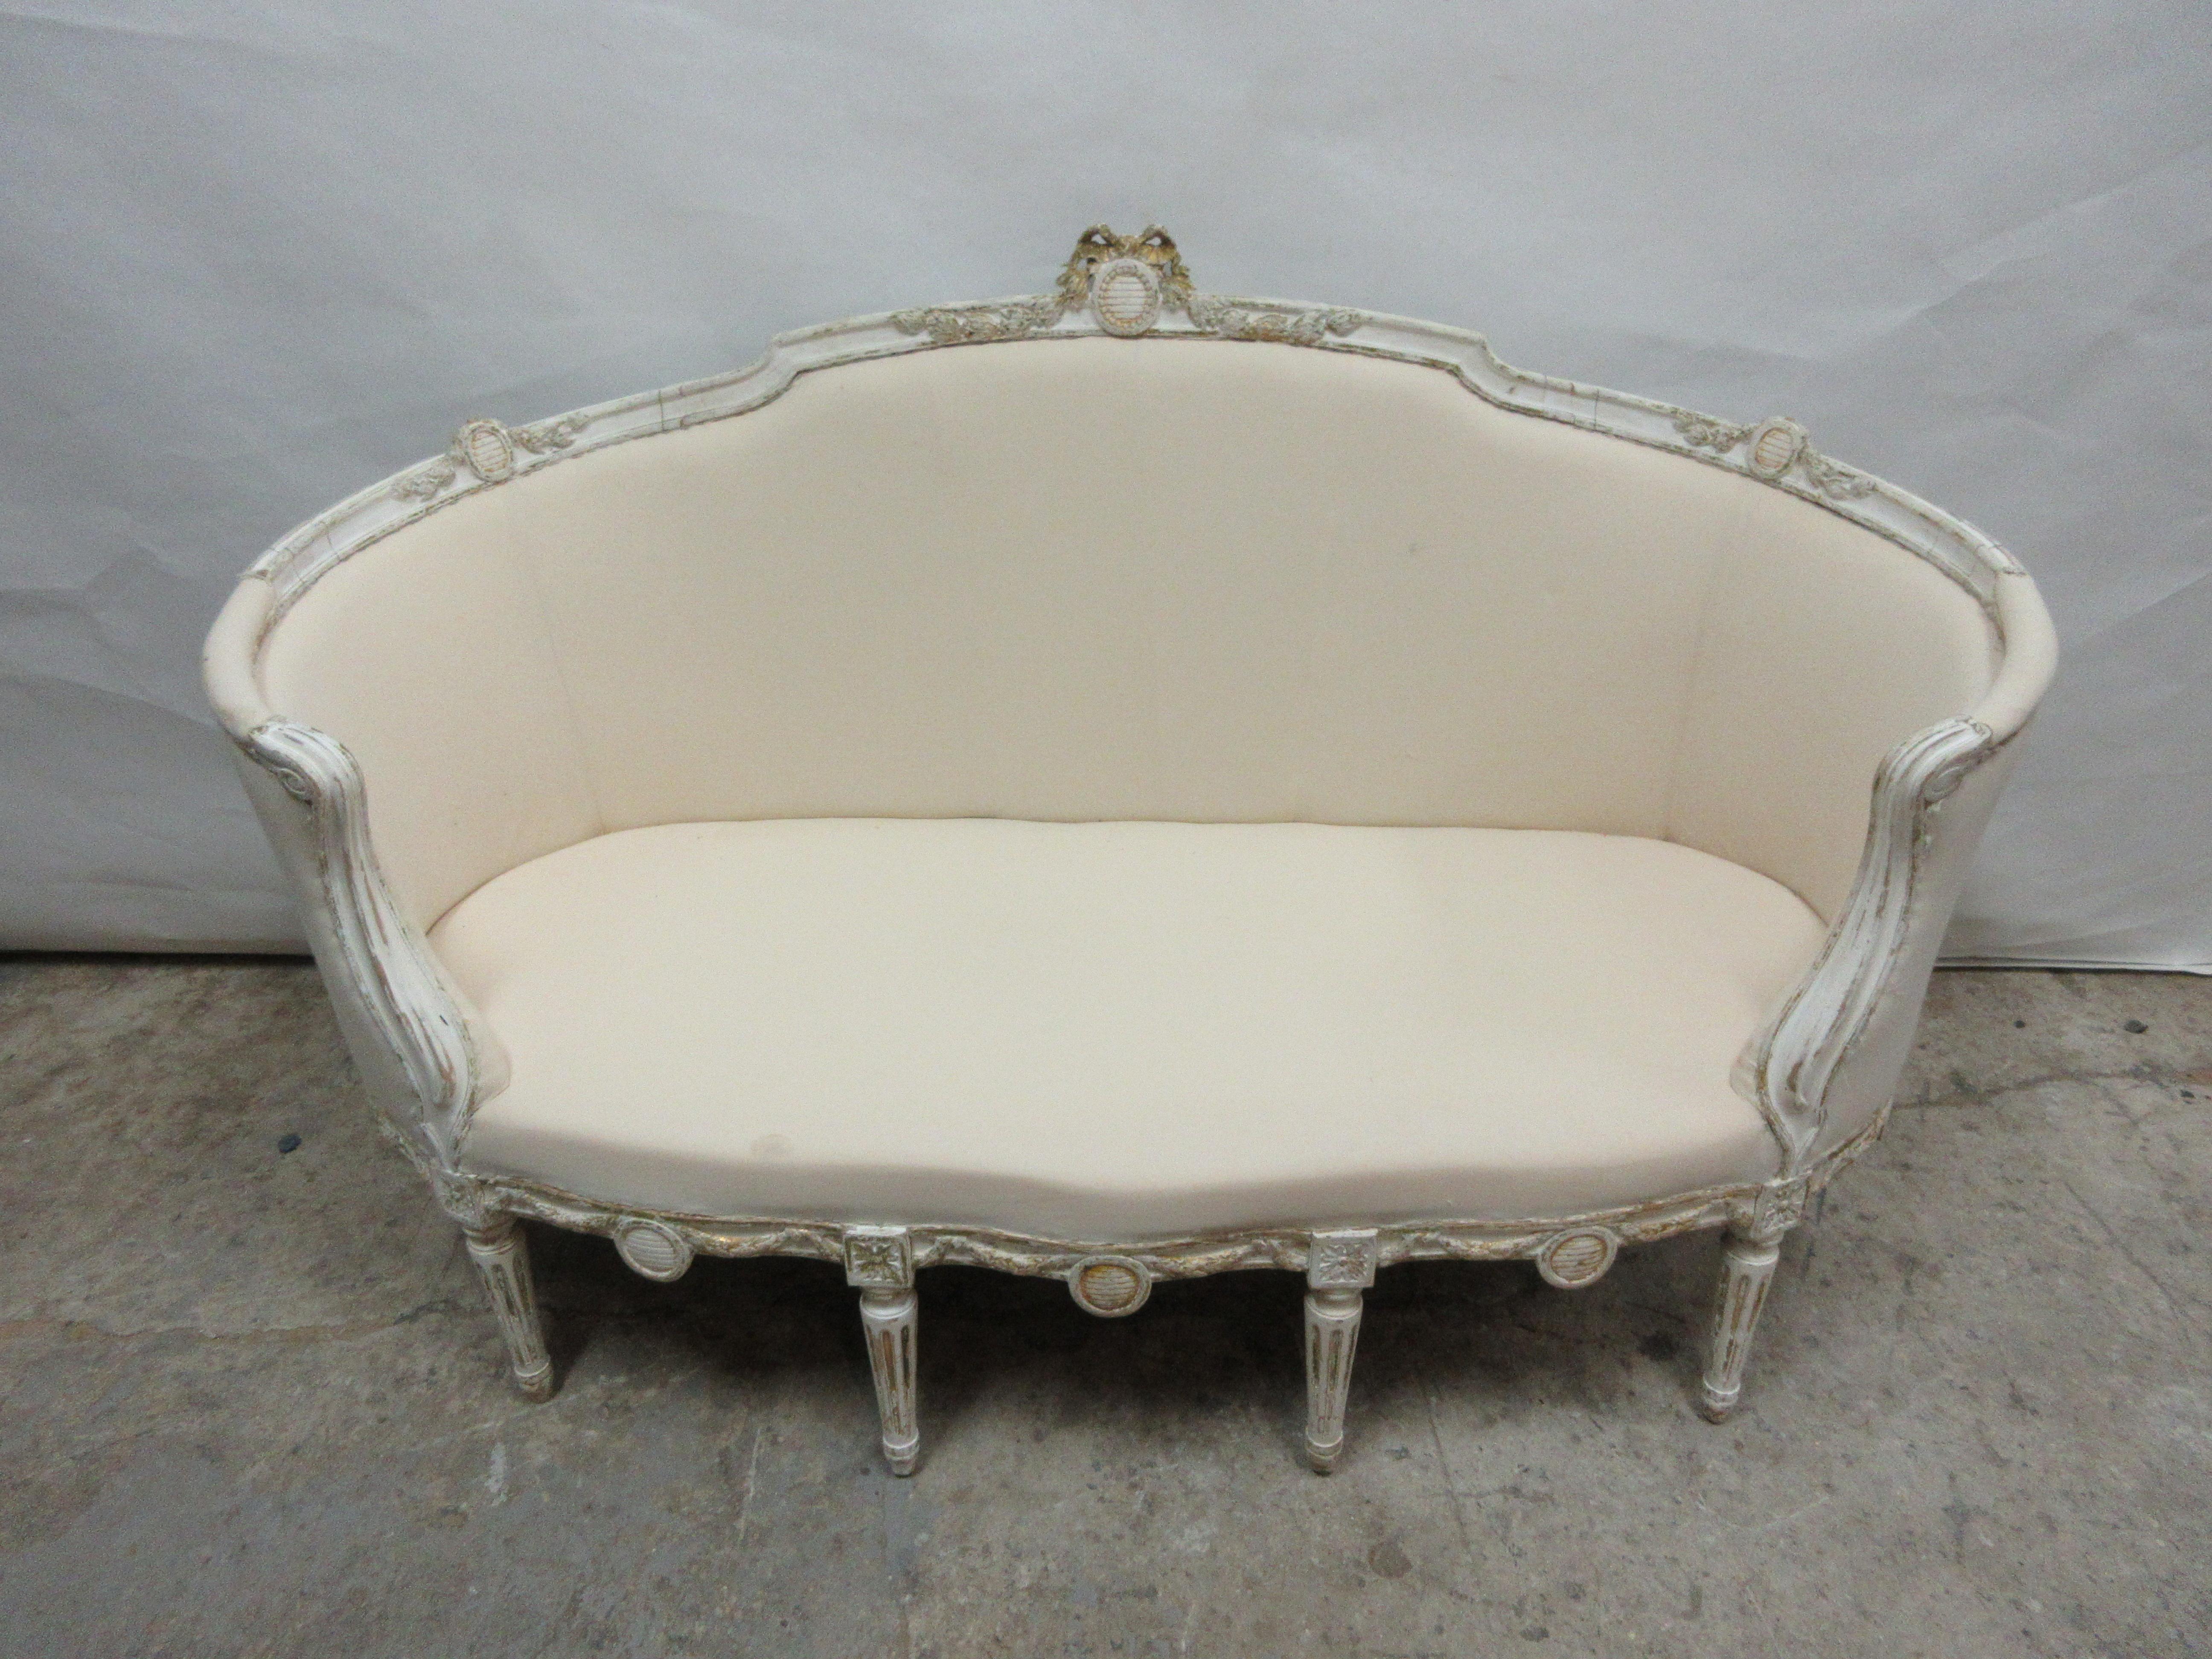 This is a 100% original painted Swedish Gustavian barrel sofa. The seating has been restored and covered in Muslin.